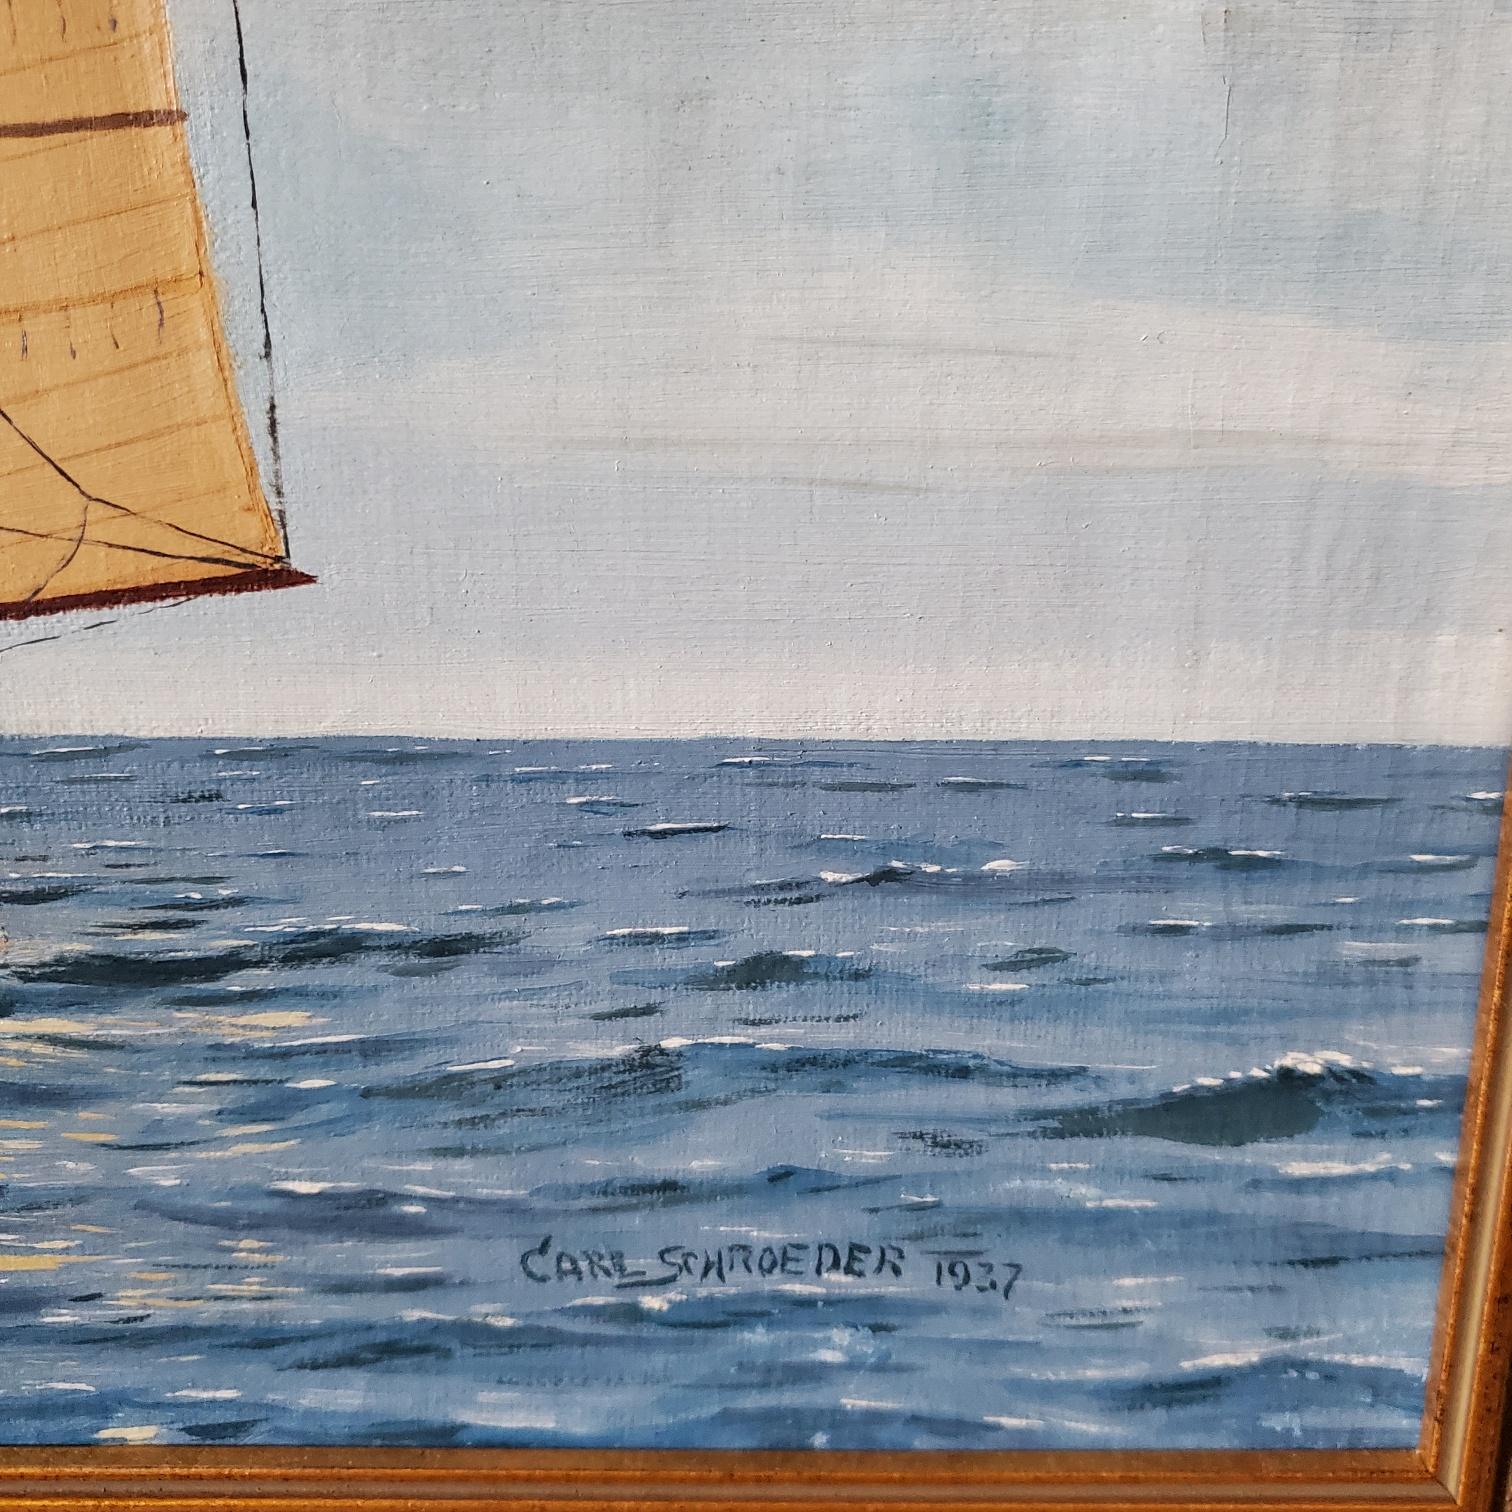 Canvas Seascape with Portrait of a Schooner-Rigged Yacht, Signed and Dated 1937 For Sale